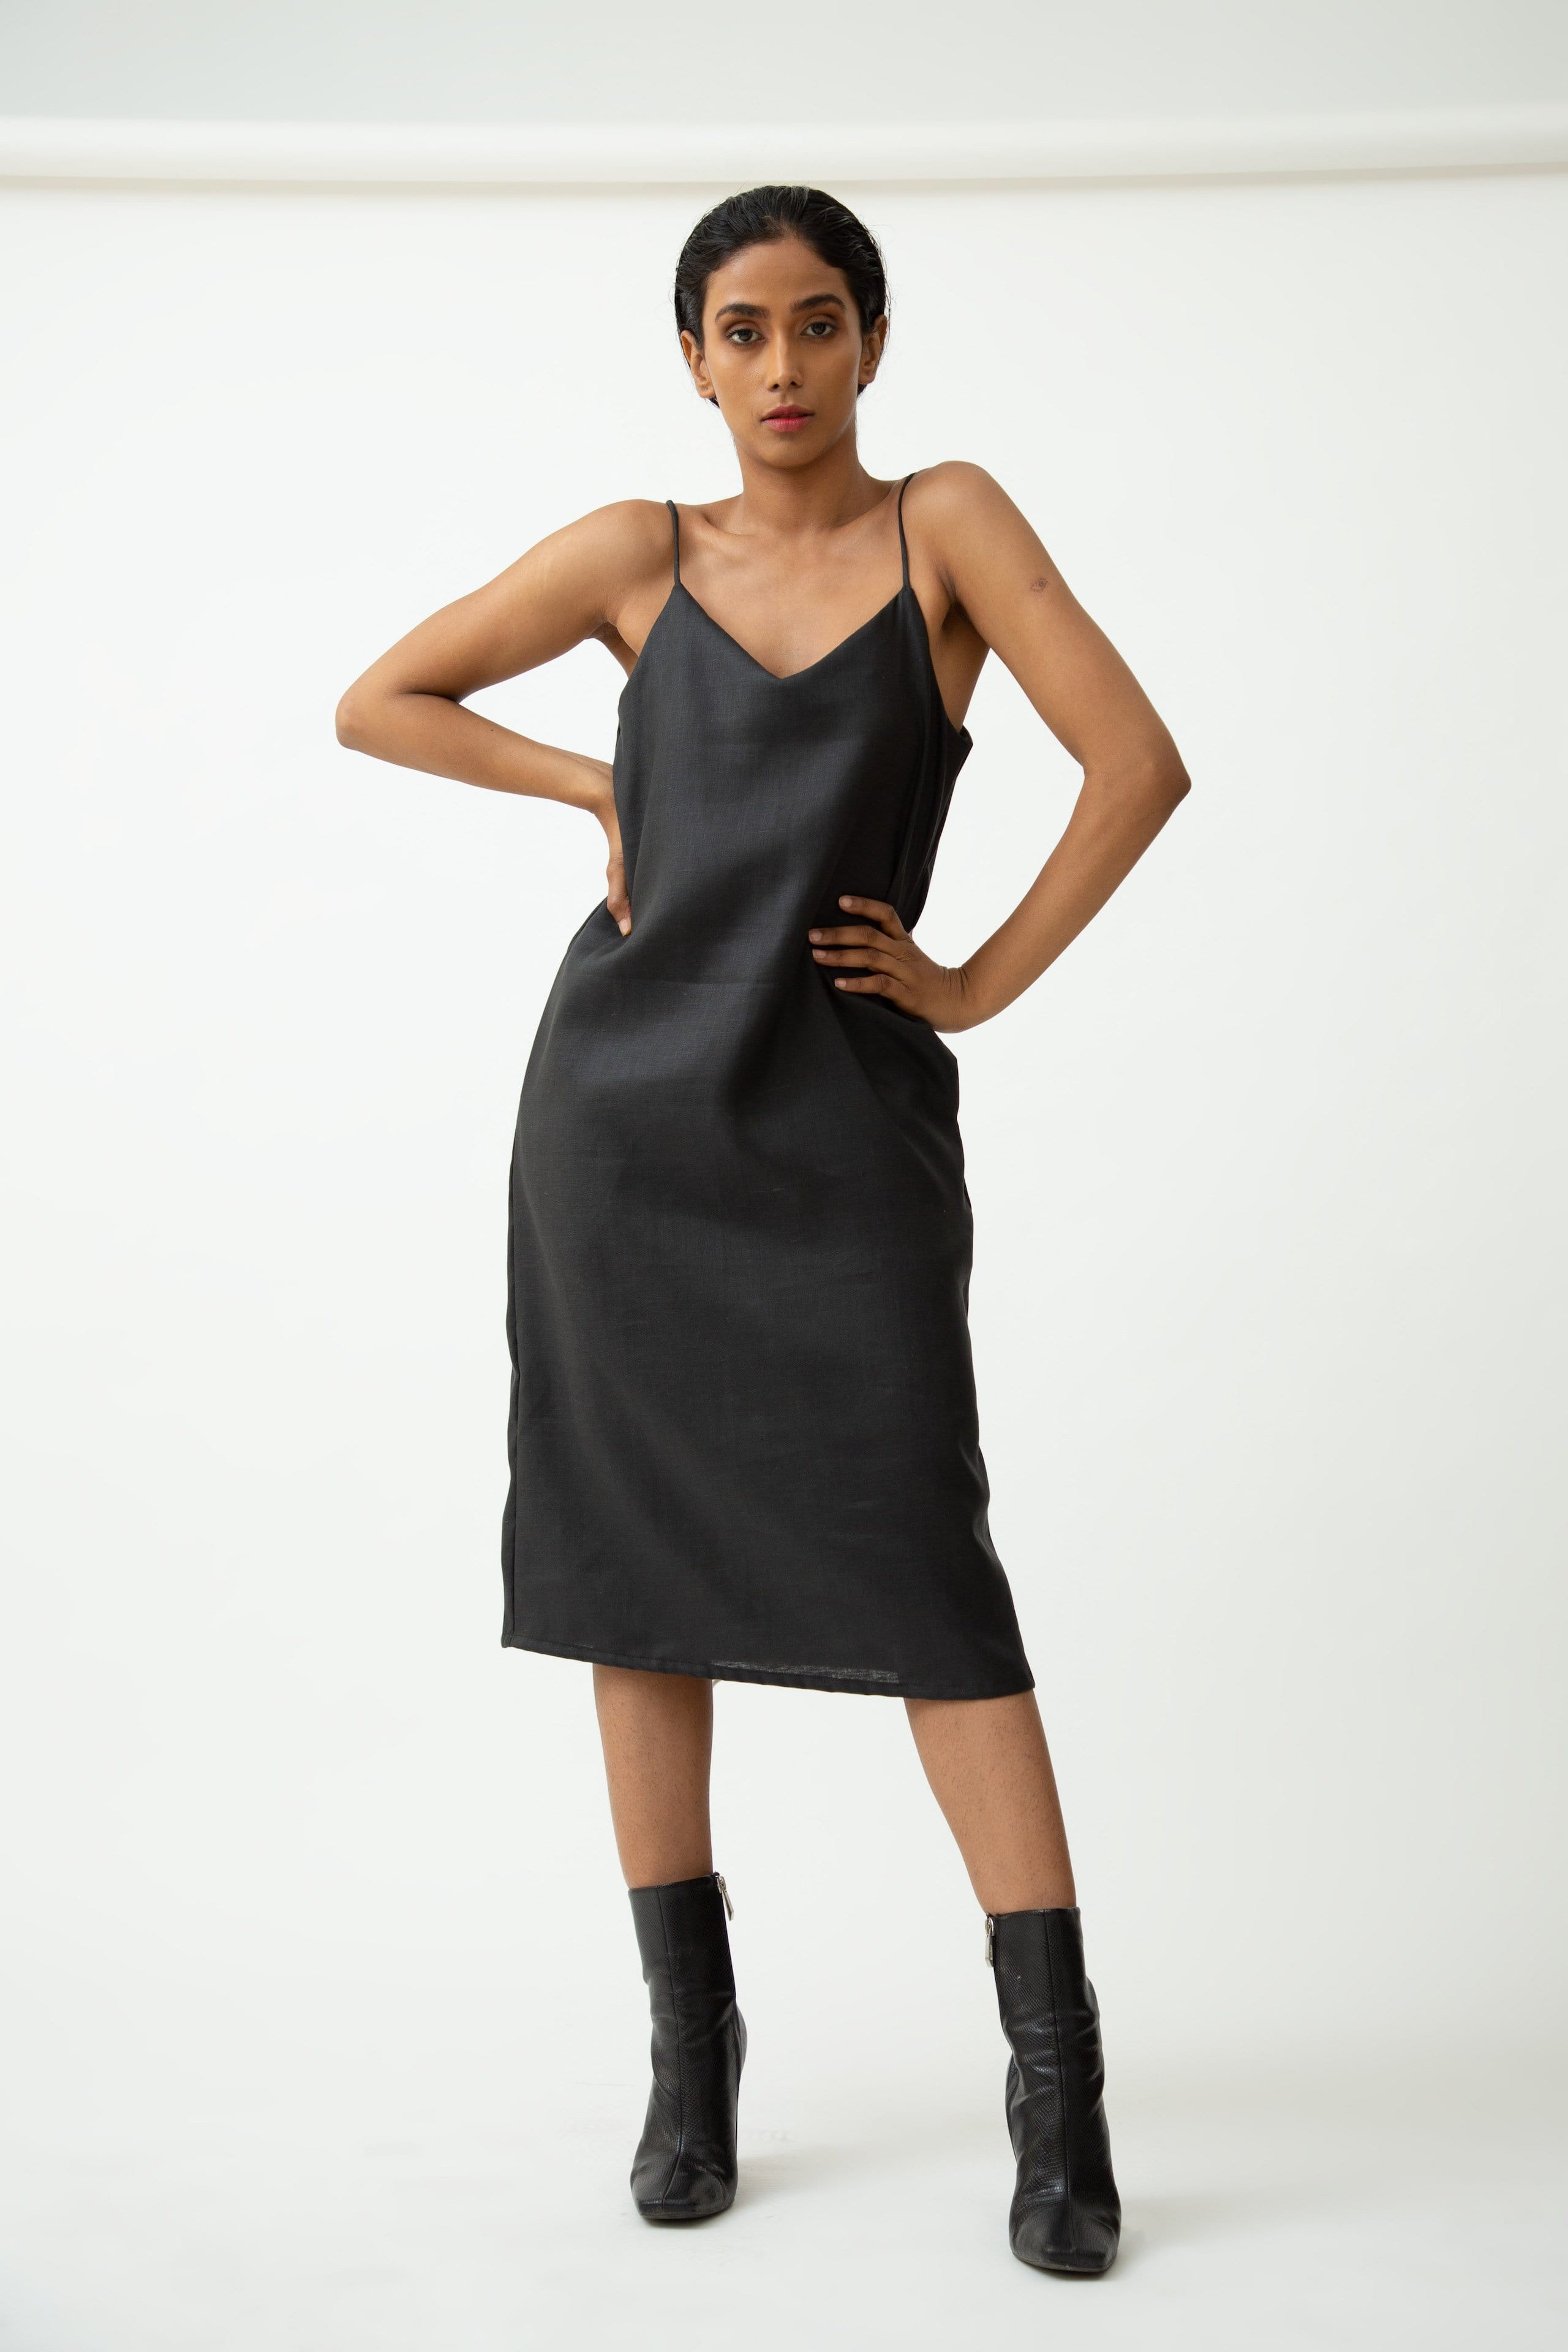 Saltpetre womens wear, indo-western slip dress in charcoal black for semi formal, casual, occassional wear.
Comfortably elegant dress in indigo blue colour with delicate straps, back slit and side pockets.